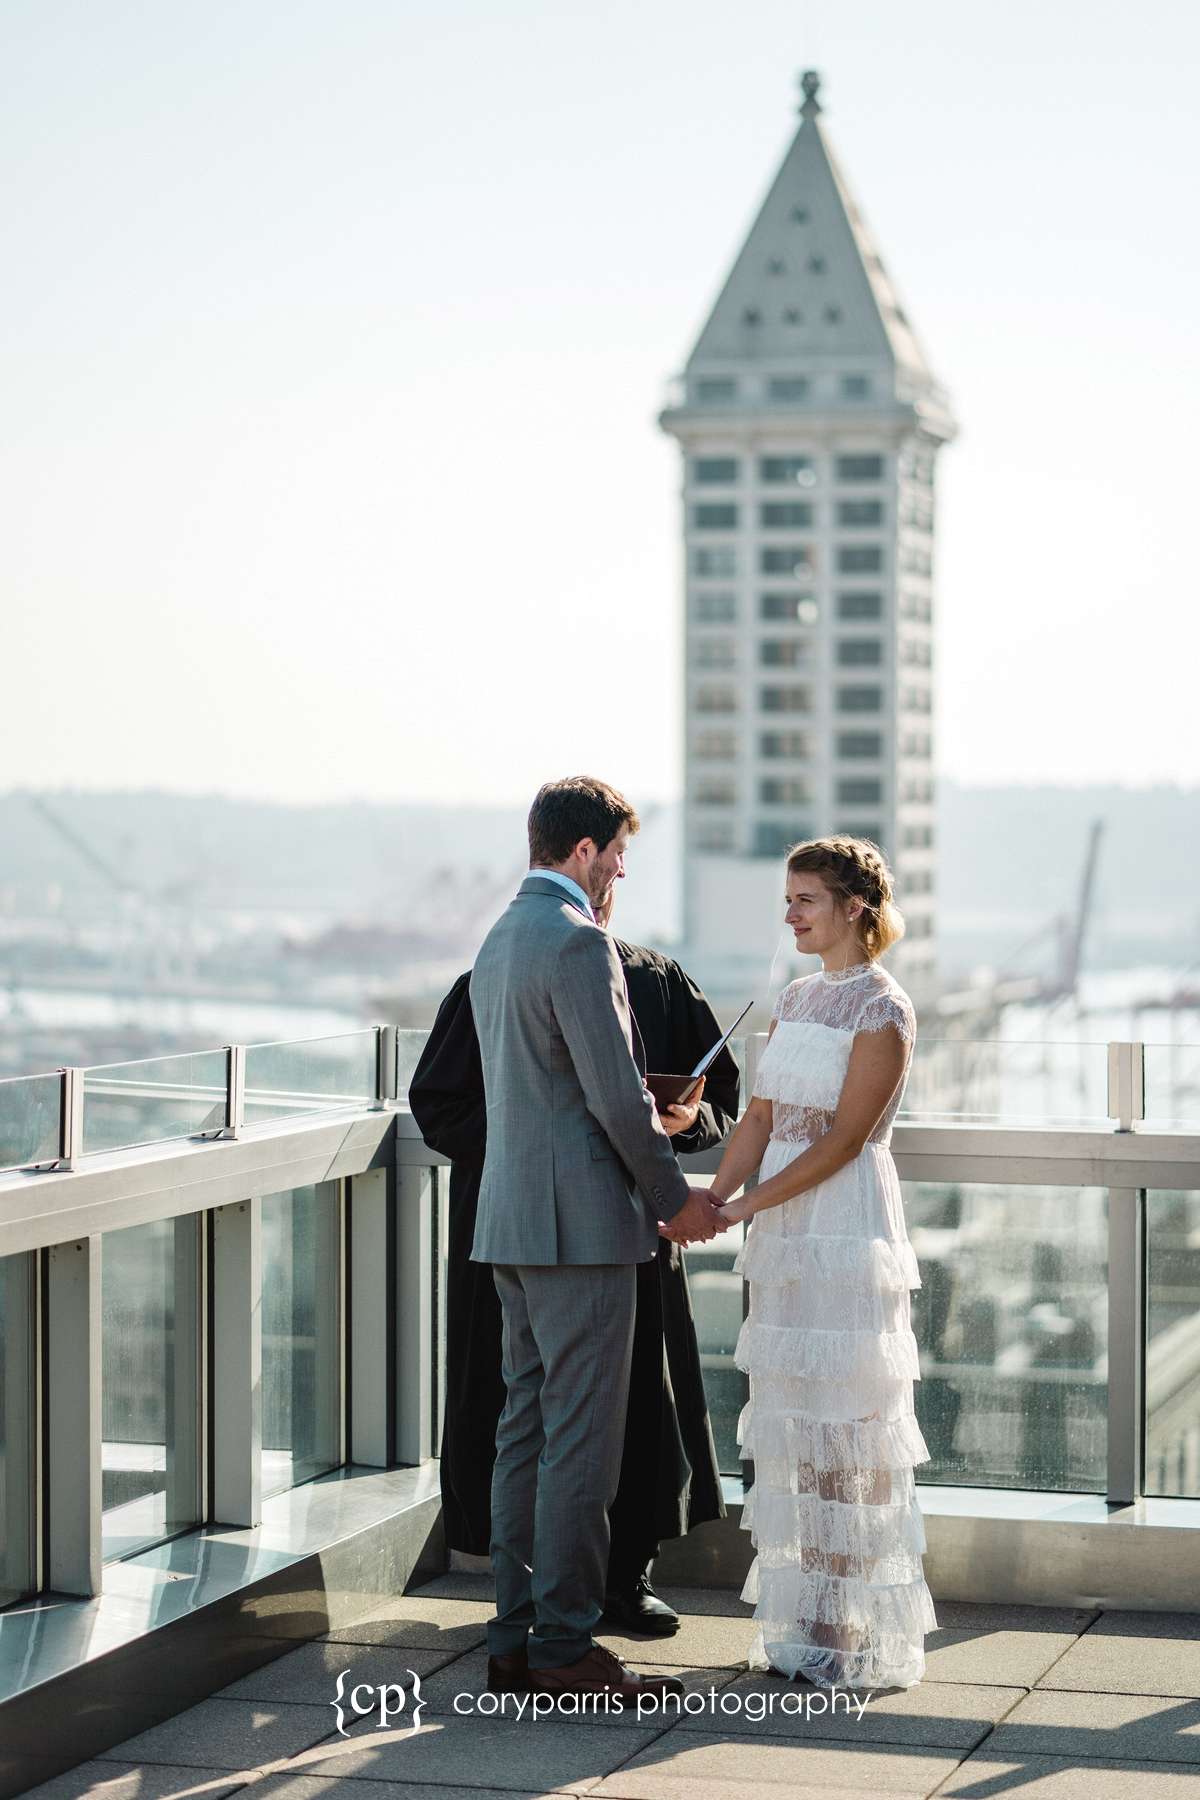 178-Seattle-Elopement-Courthouse.jpg